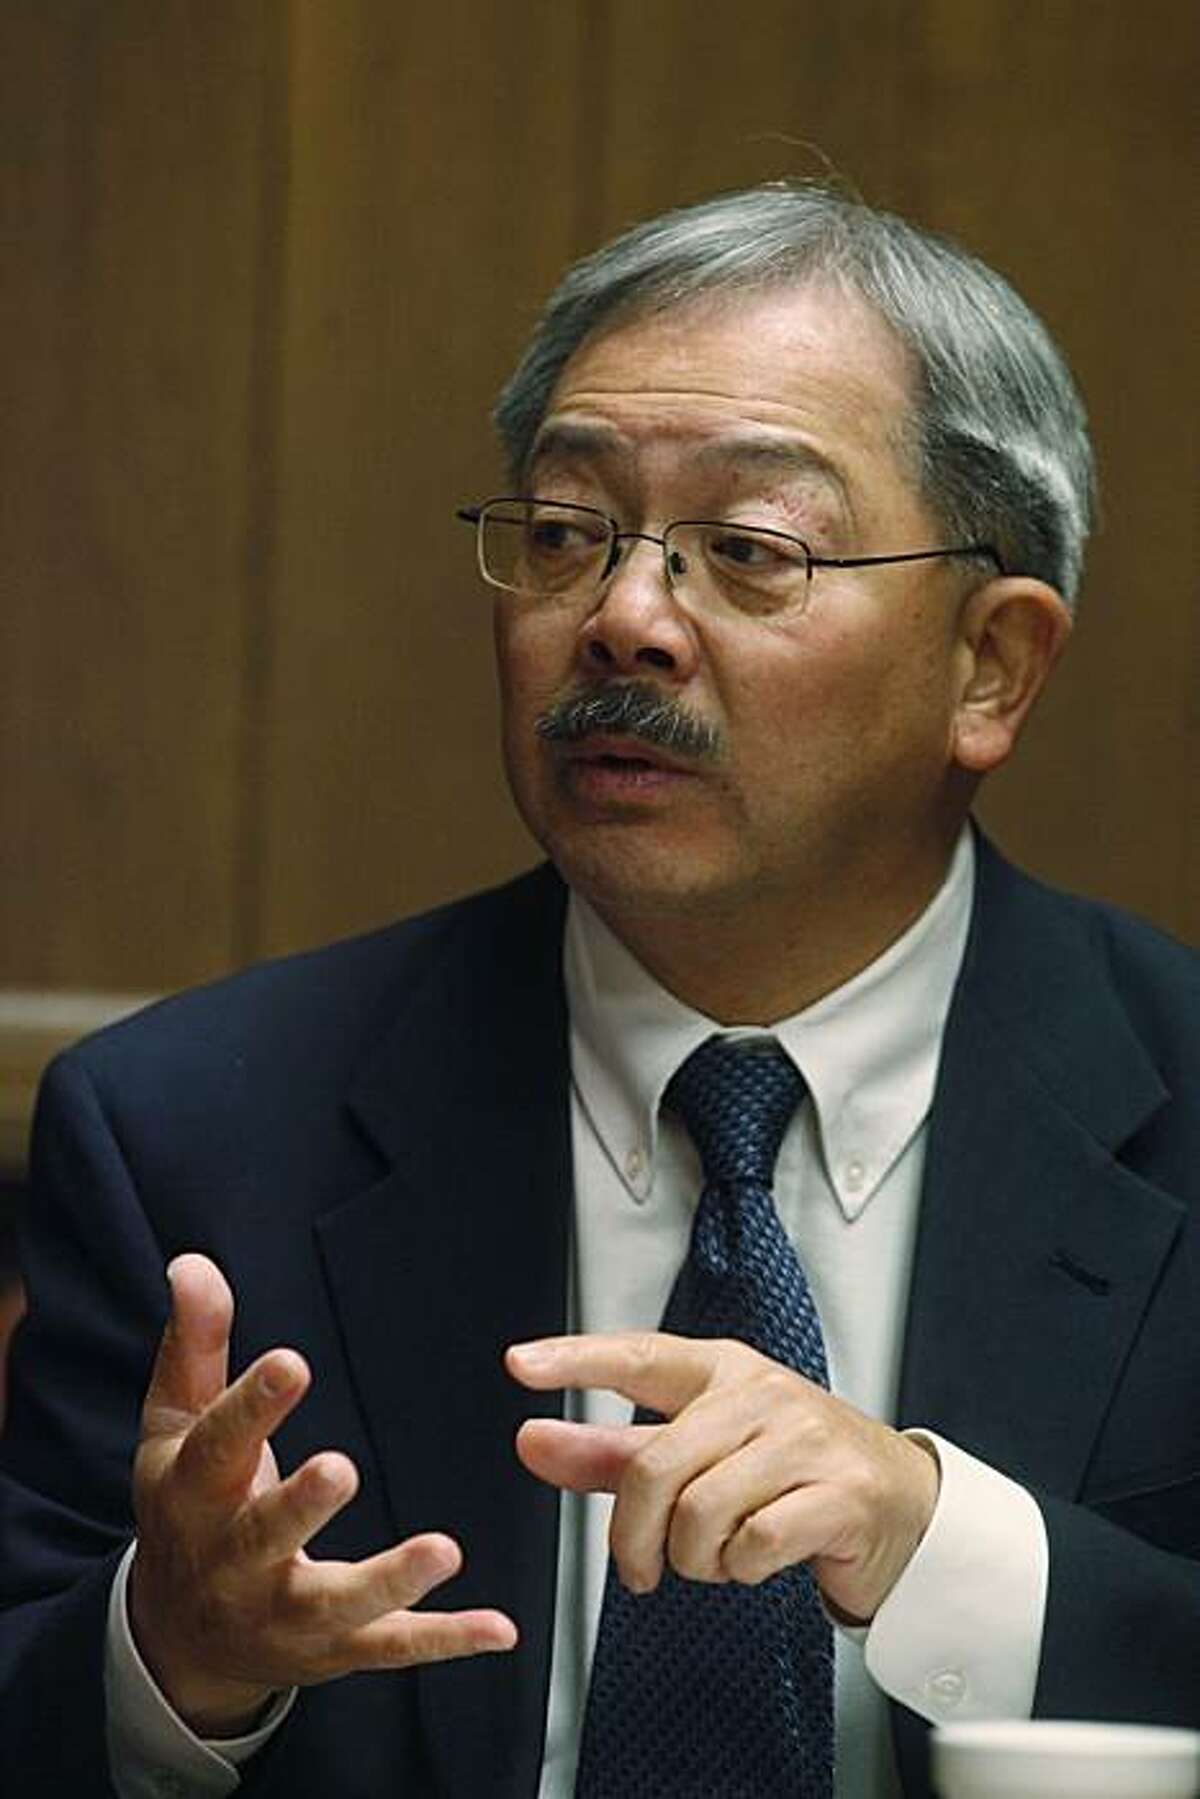 San Francisco Mayor Ed Lee, meets with the San Francisco Chronicle editorial board on Tuesday January. 25, 2011 in San Francisco, Calif.